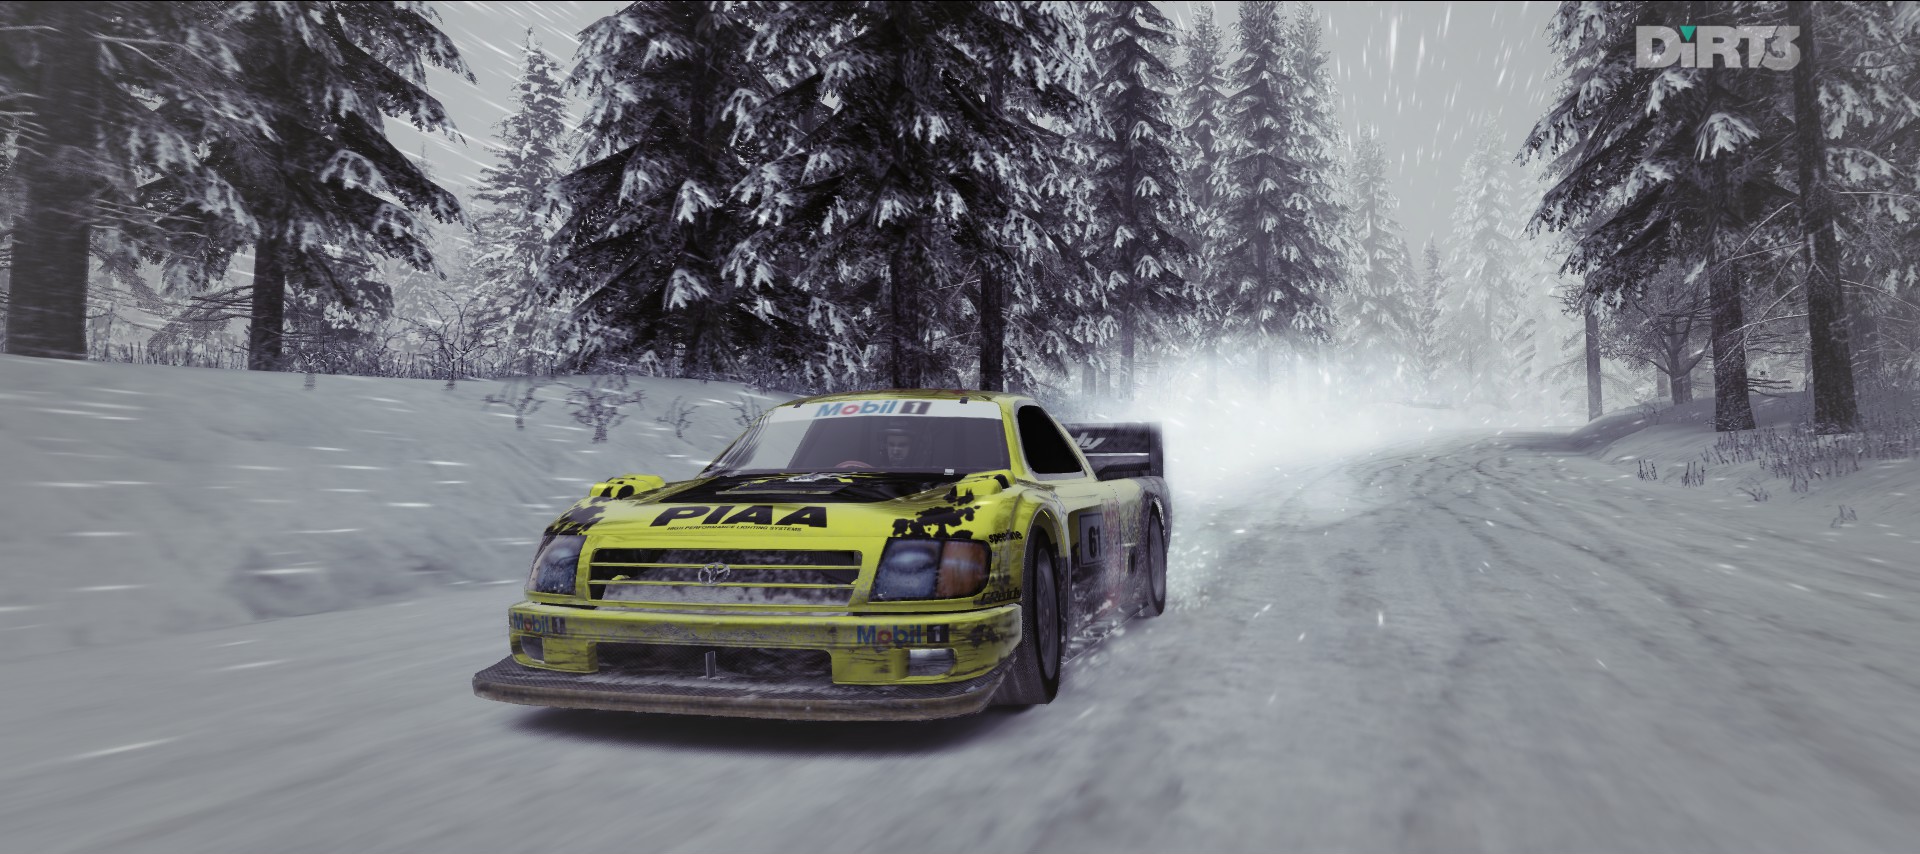 Dirt 3 not on steam фото 67